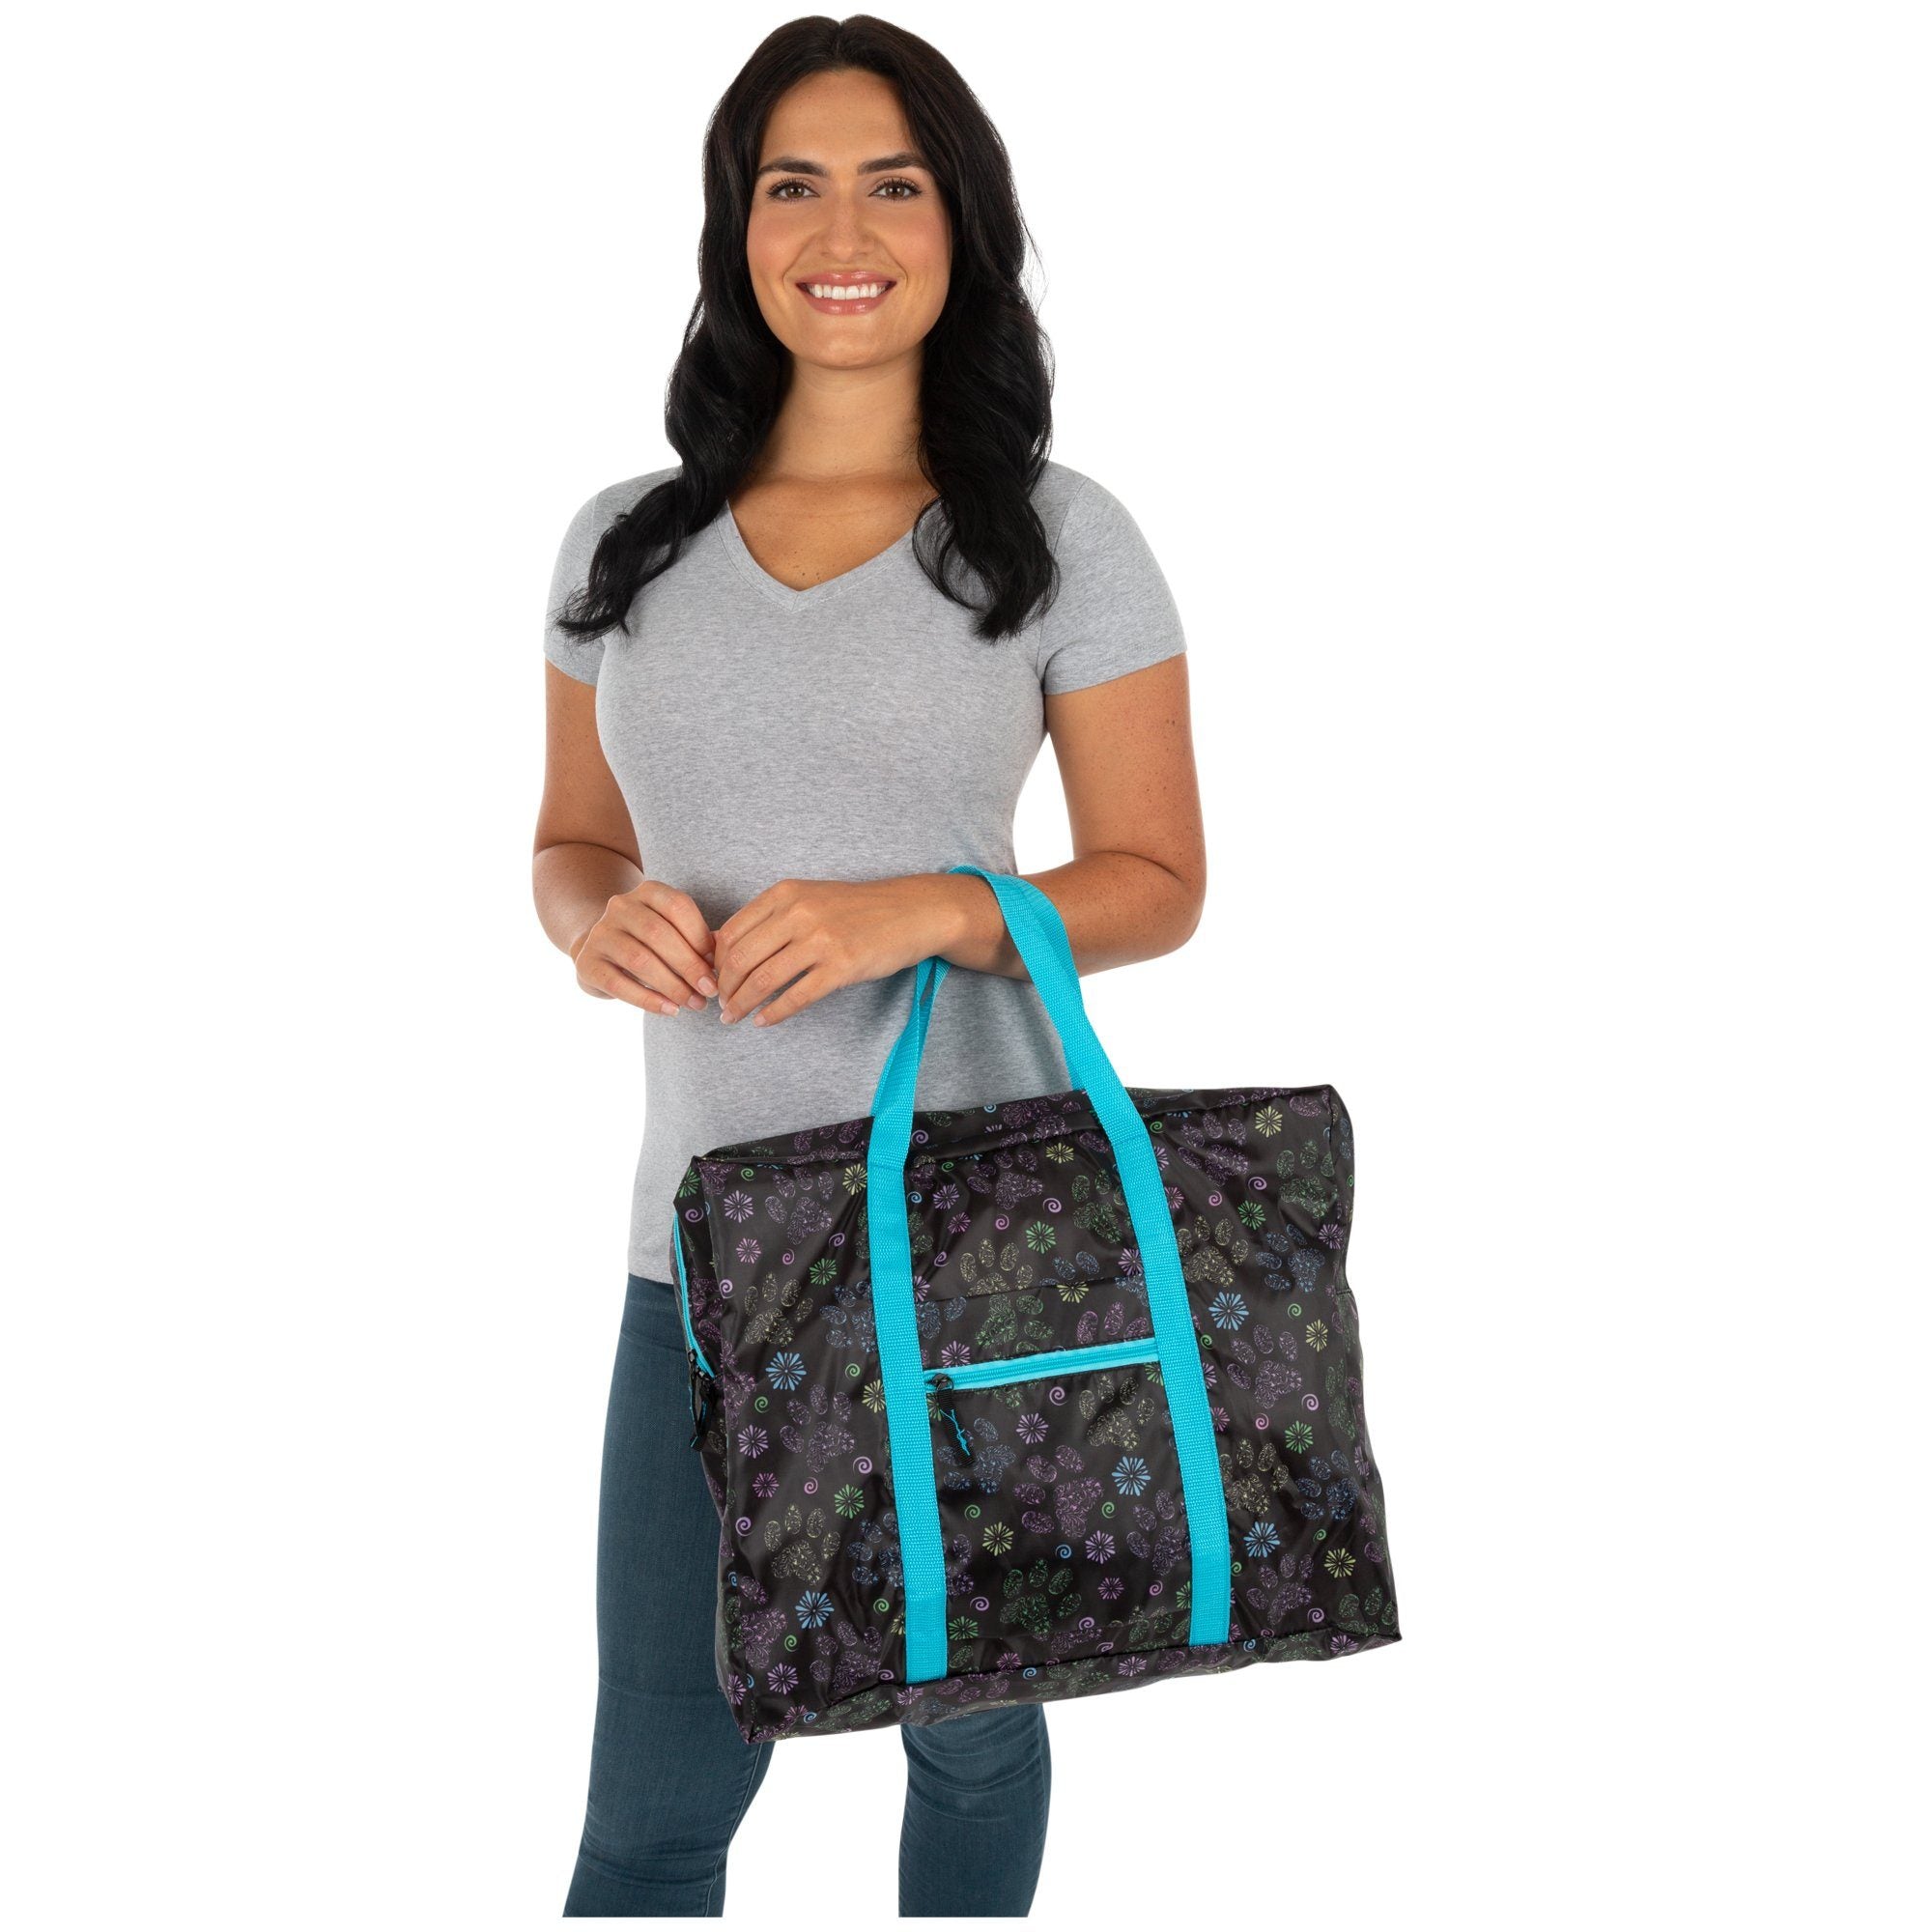 Paws in Bloom Packable Duffle Bag | The Animal Rescue Site